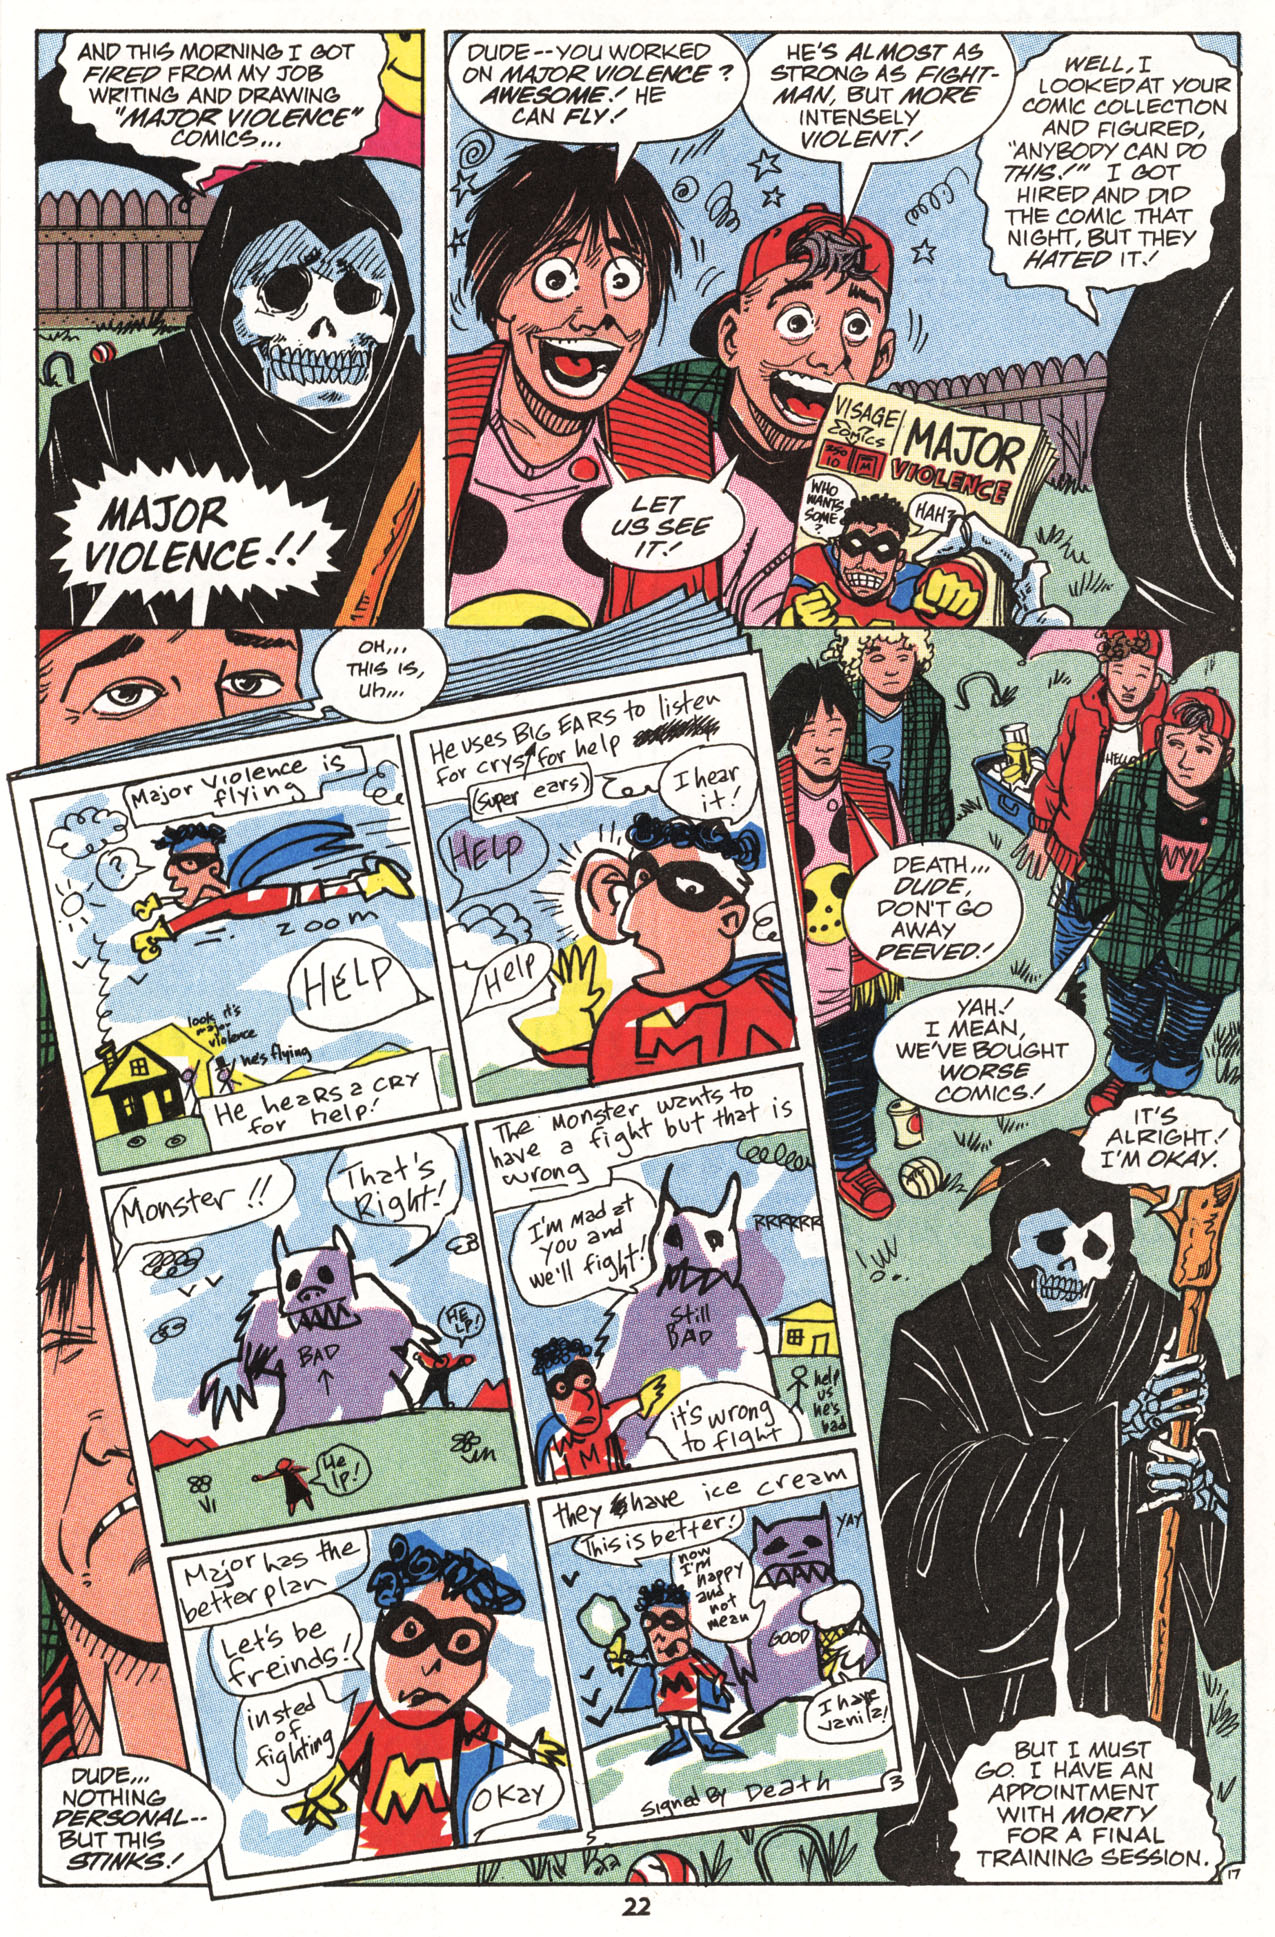 Read online Bill & Ted's Excellent Comic Book comic -  Issue #9 - 24